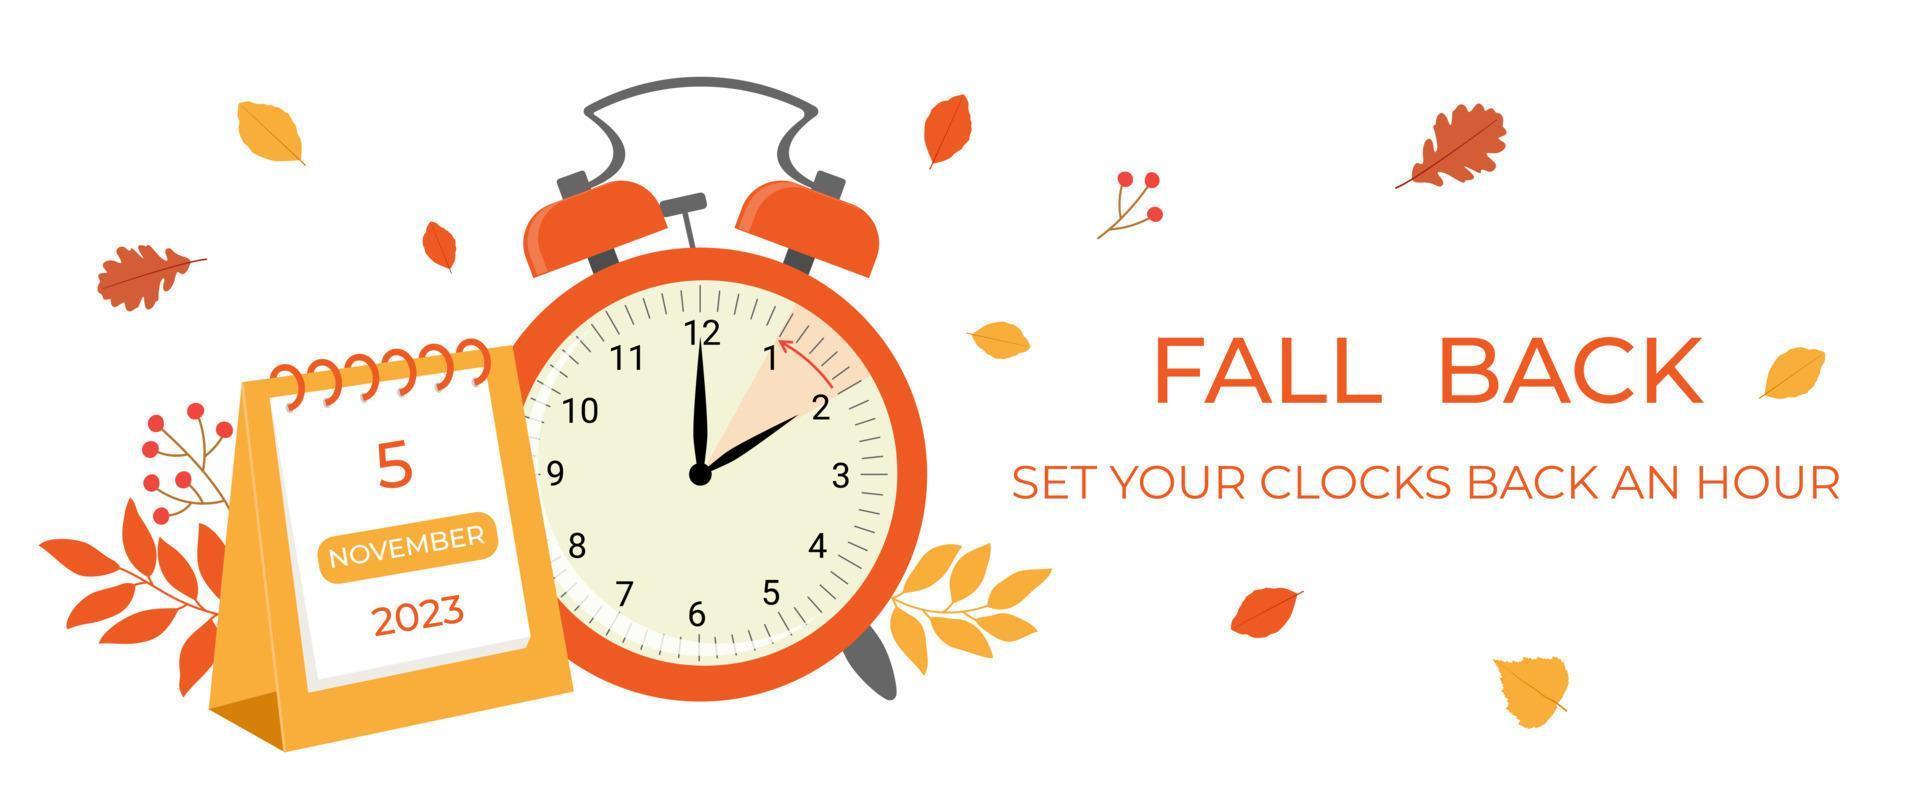 Daylight saving time ends 2023 fall back concept Vector Image